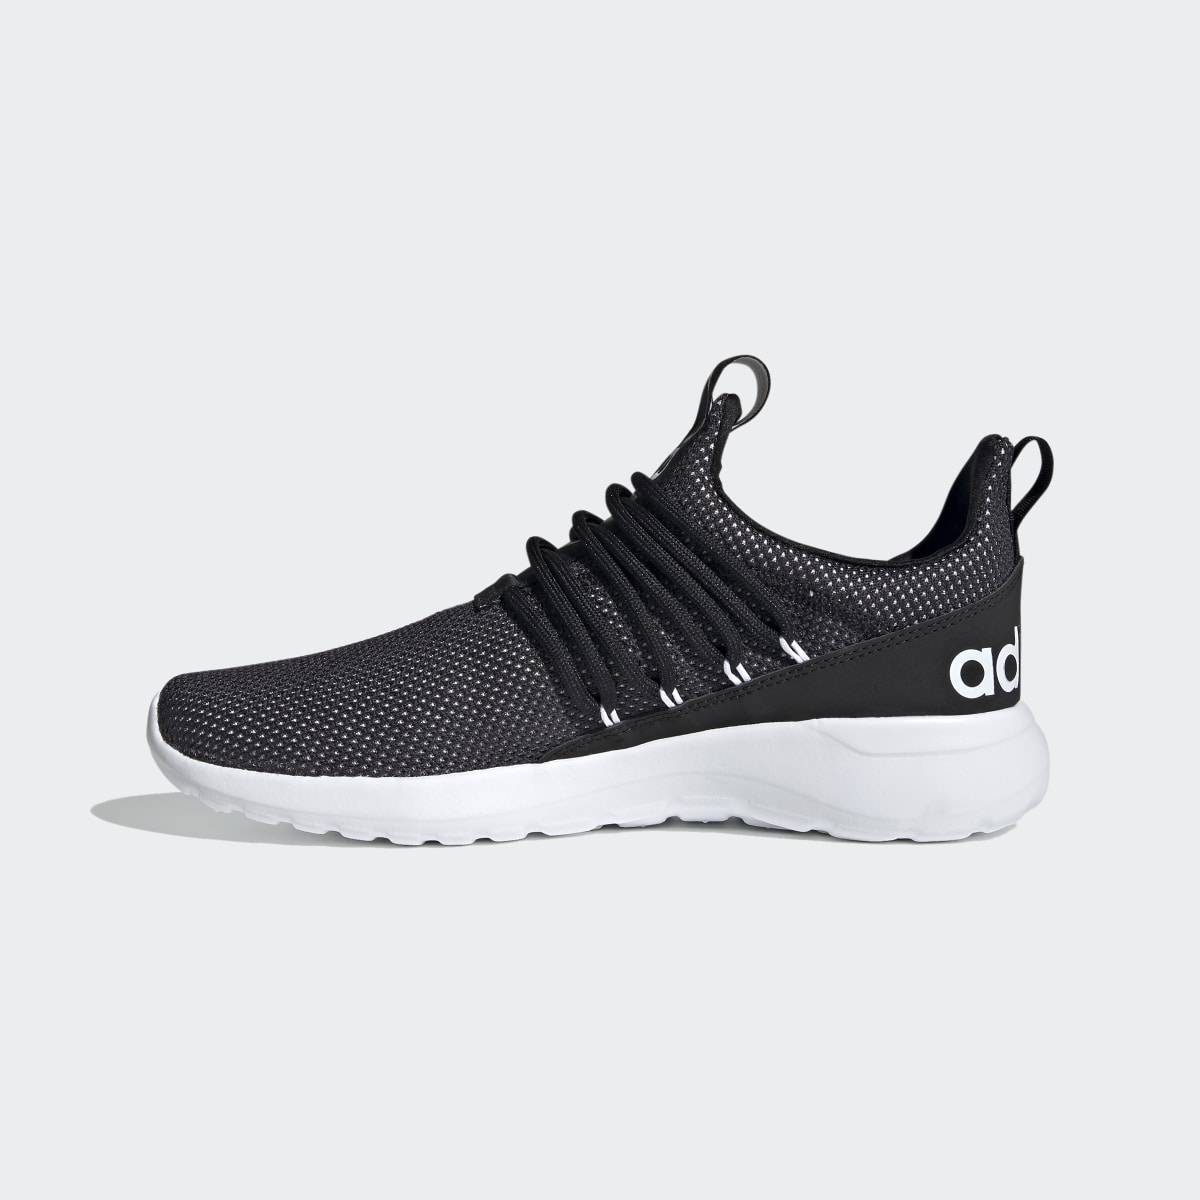 Adidas Lite Racer Adapt 3 Shoes. 7